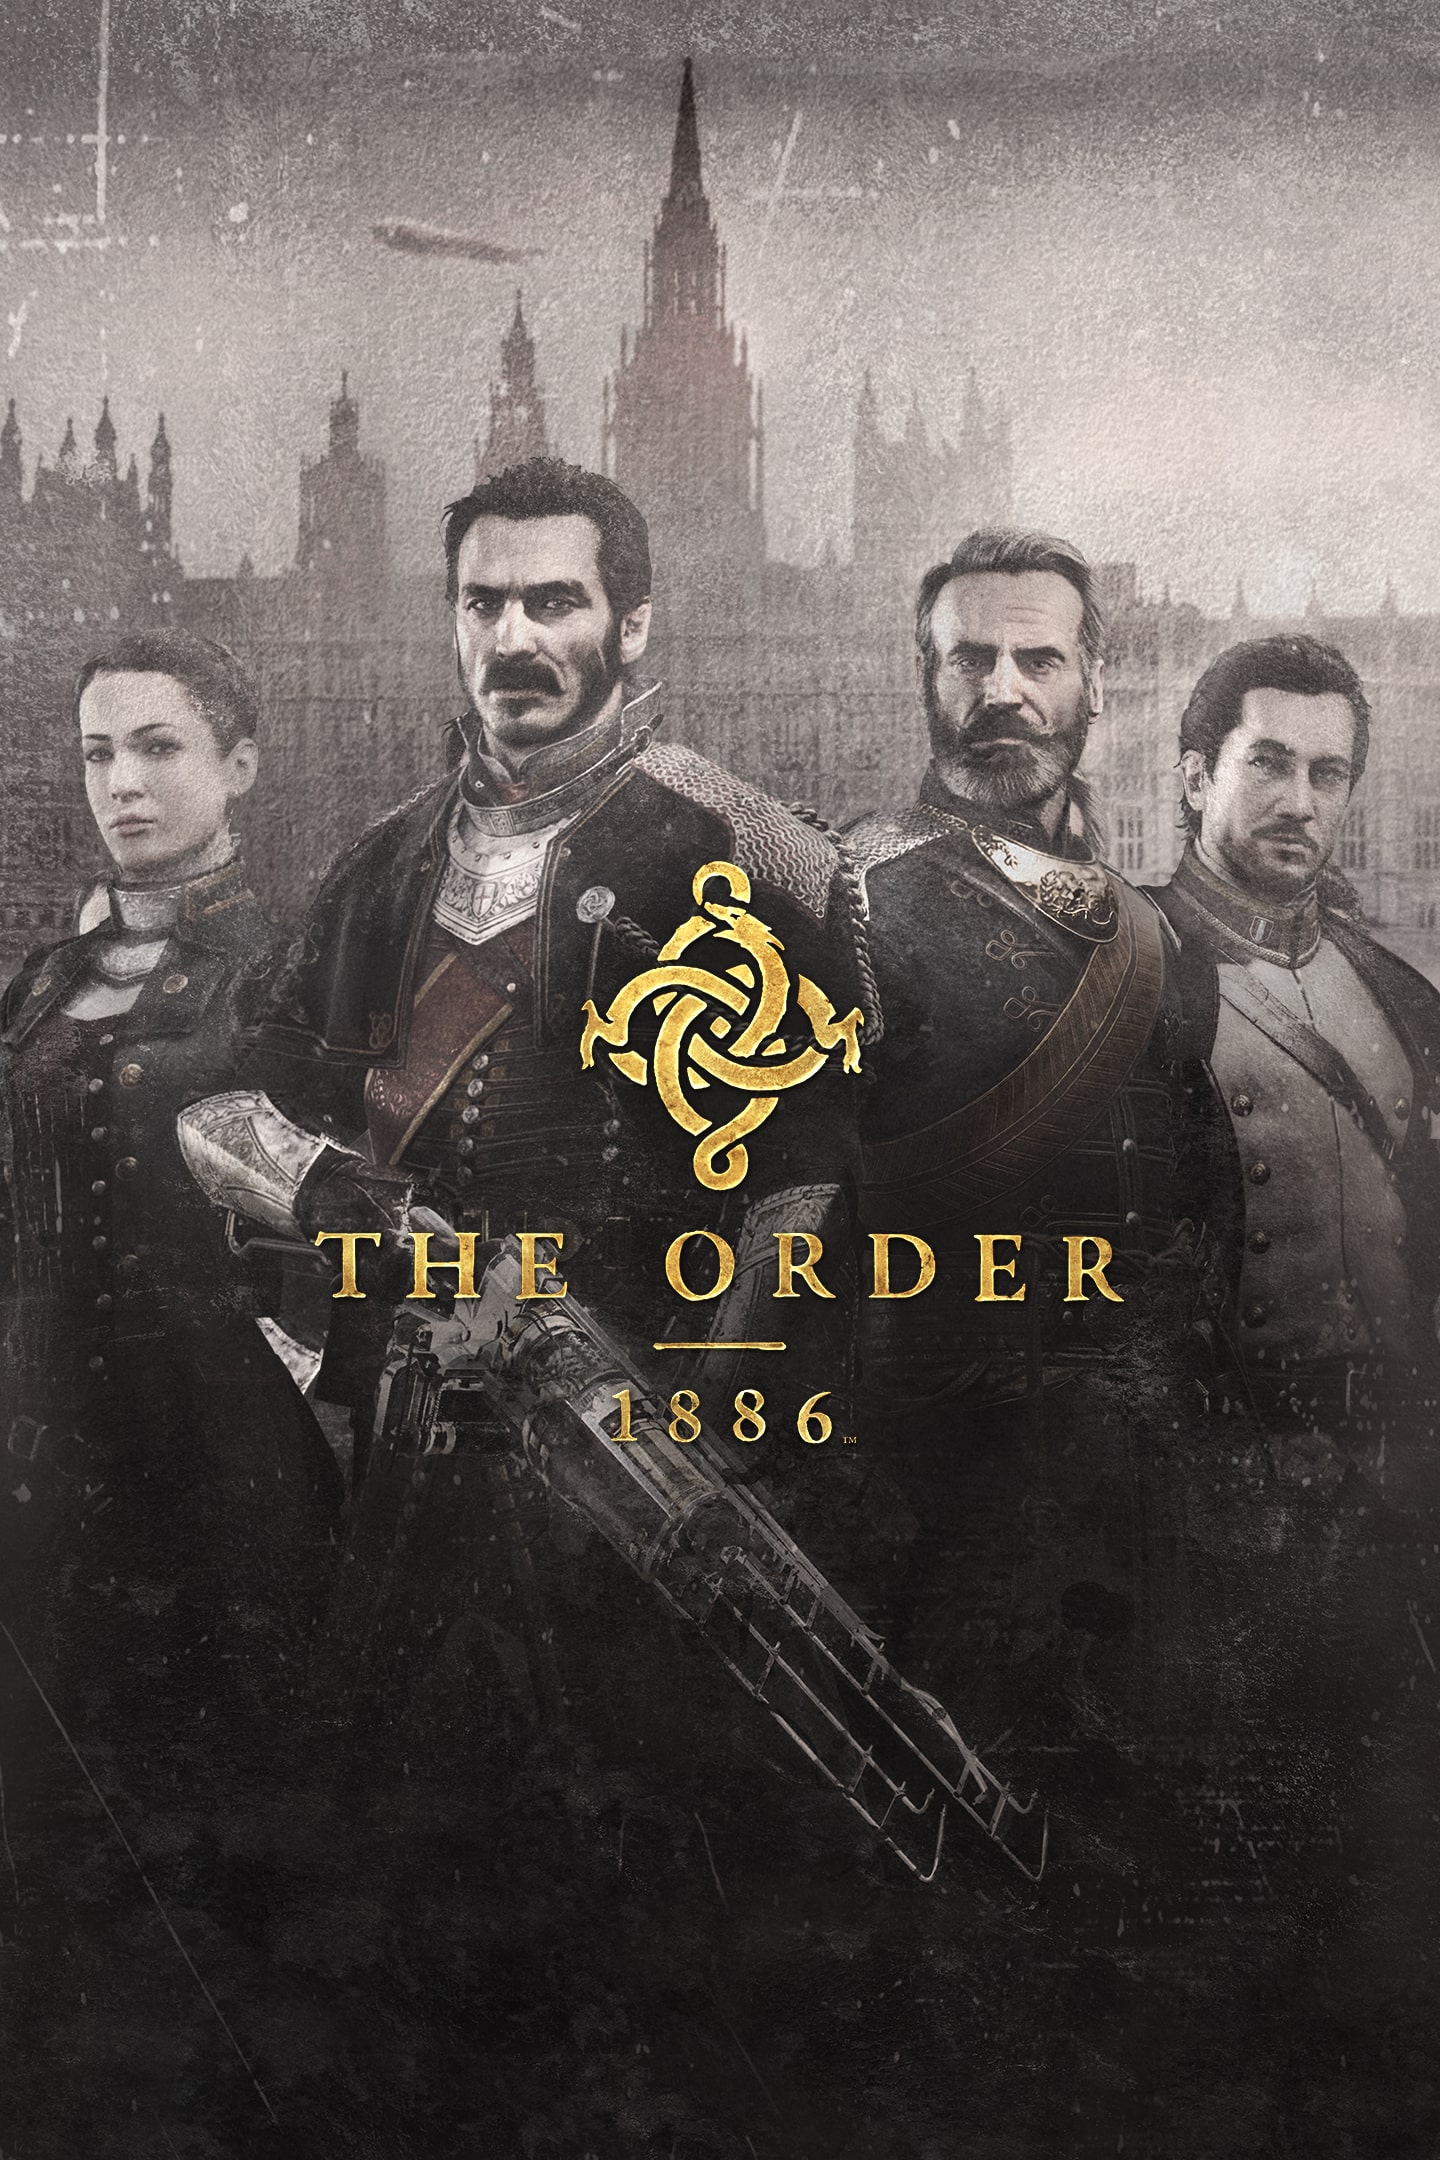 Орден 1886 ps4. Ордер 1886 ps4. The order 1886 город. Order 1886 ps4.